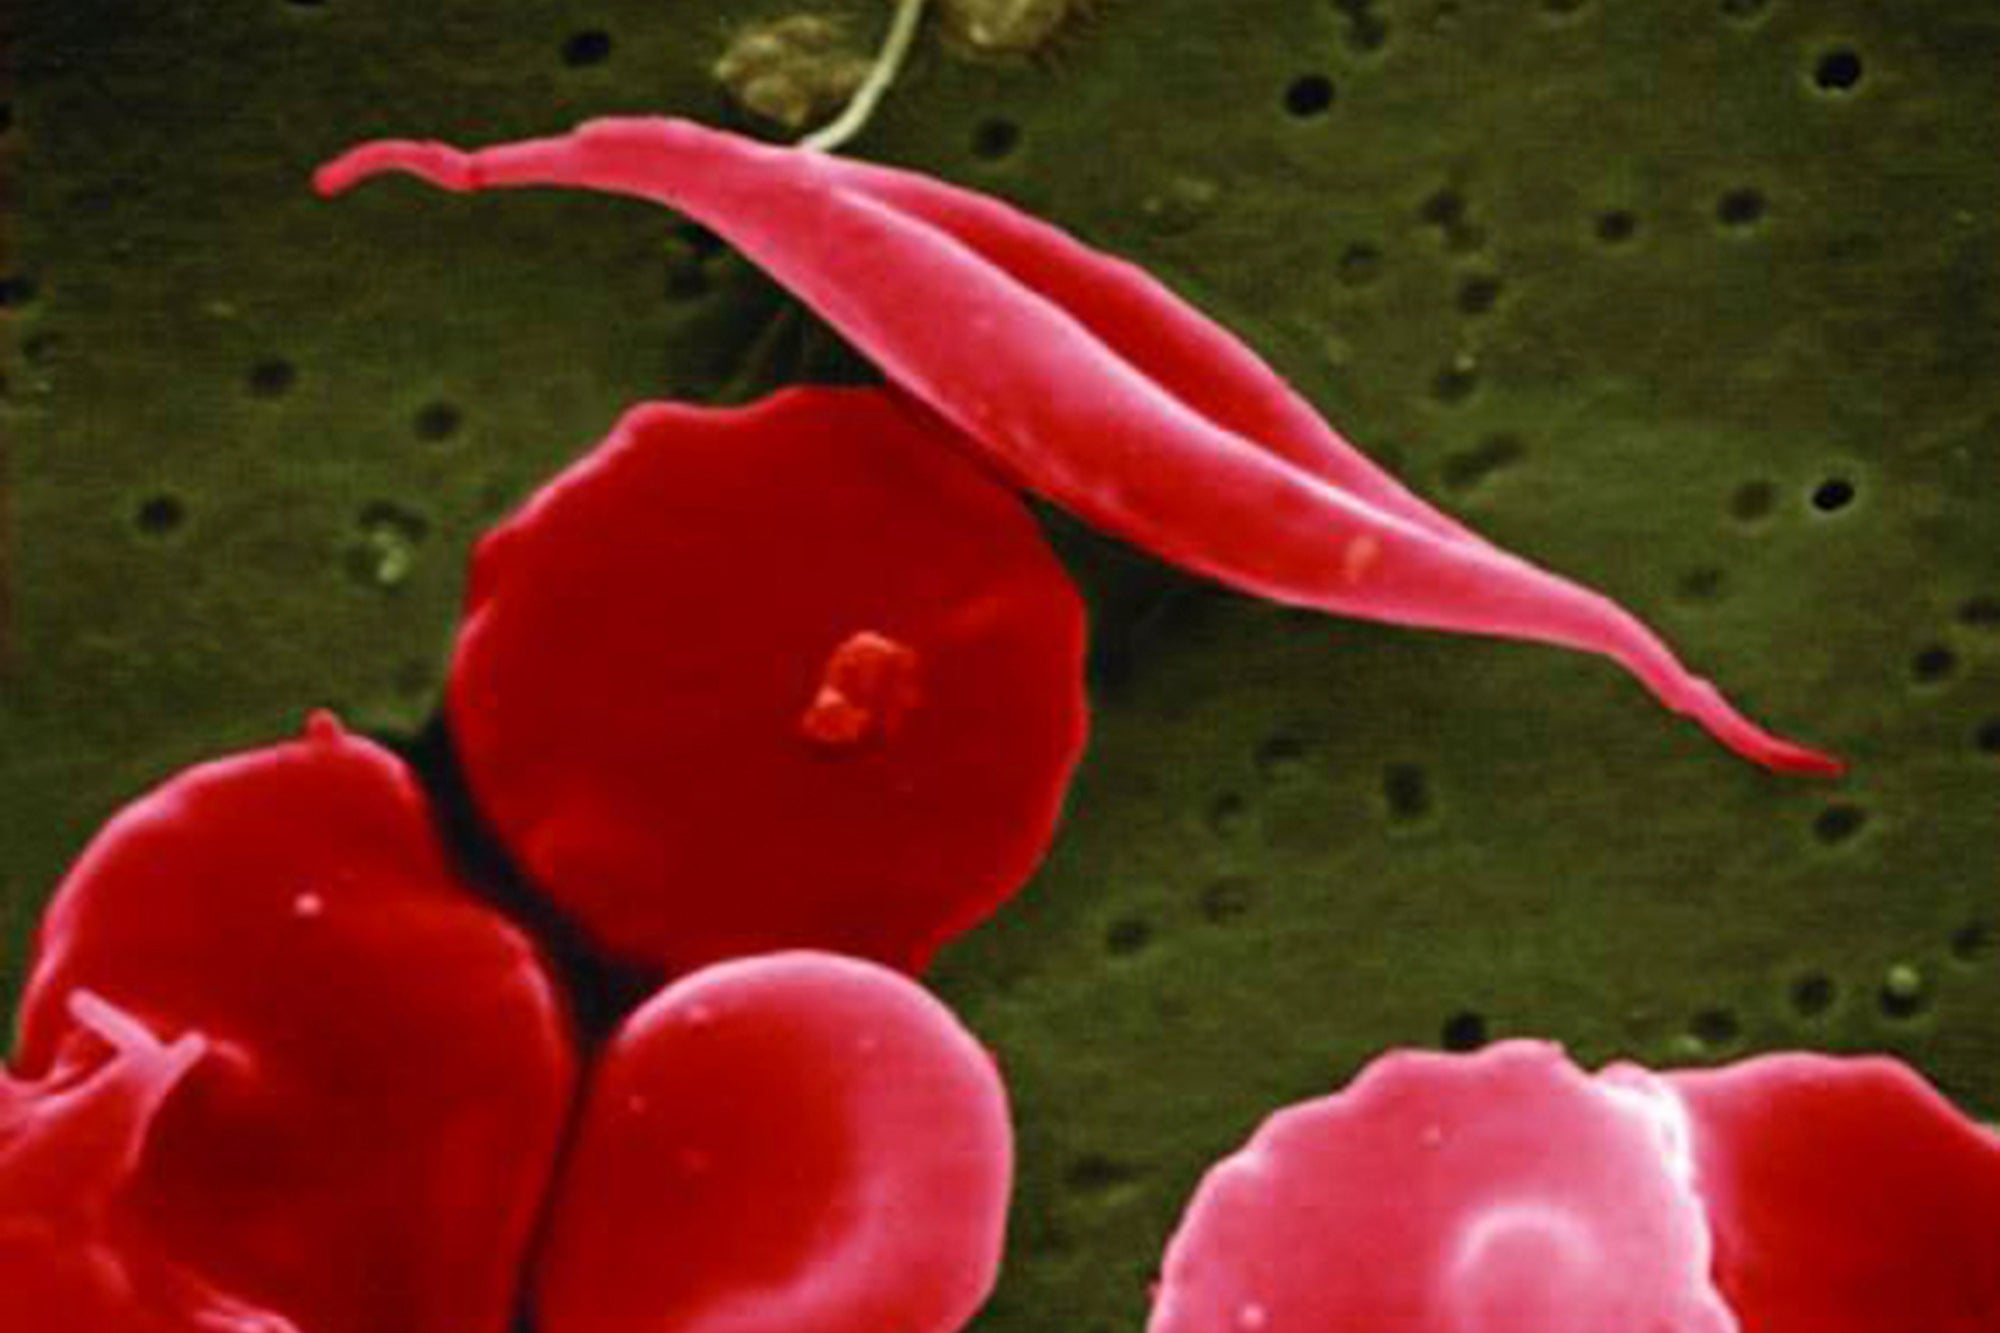 Sickle cell disease gets its name from the process of healthy, oxygenated, O-shaped red blood cells losing oxygen via an abnormal haemoglobin protein, causing the cells to turn C-shaped, resembling a farm tool called a sickle